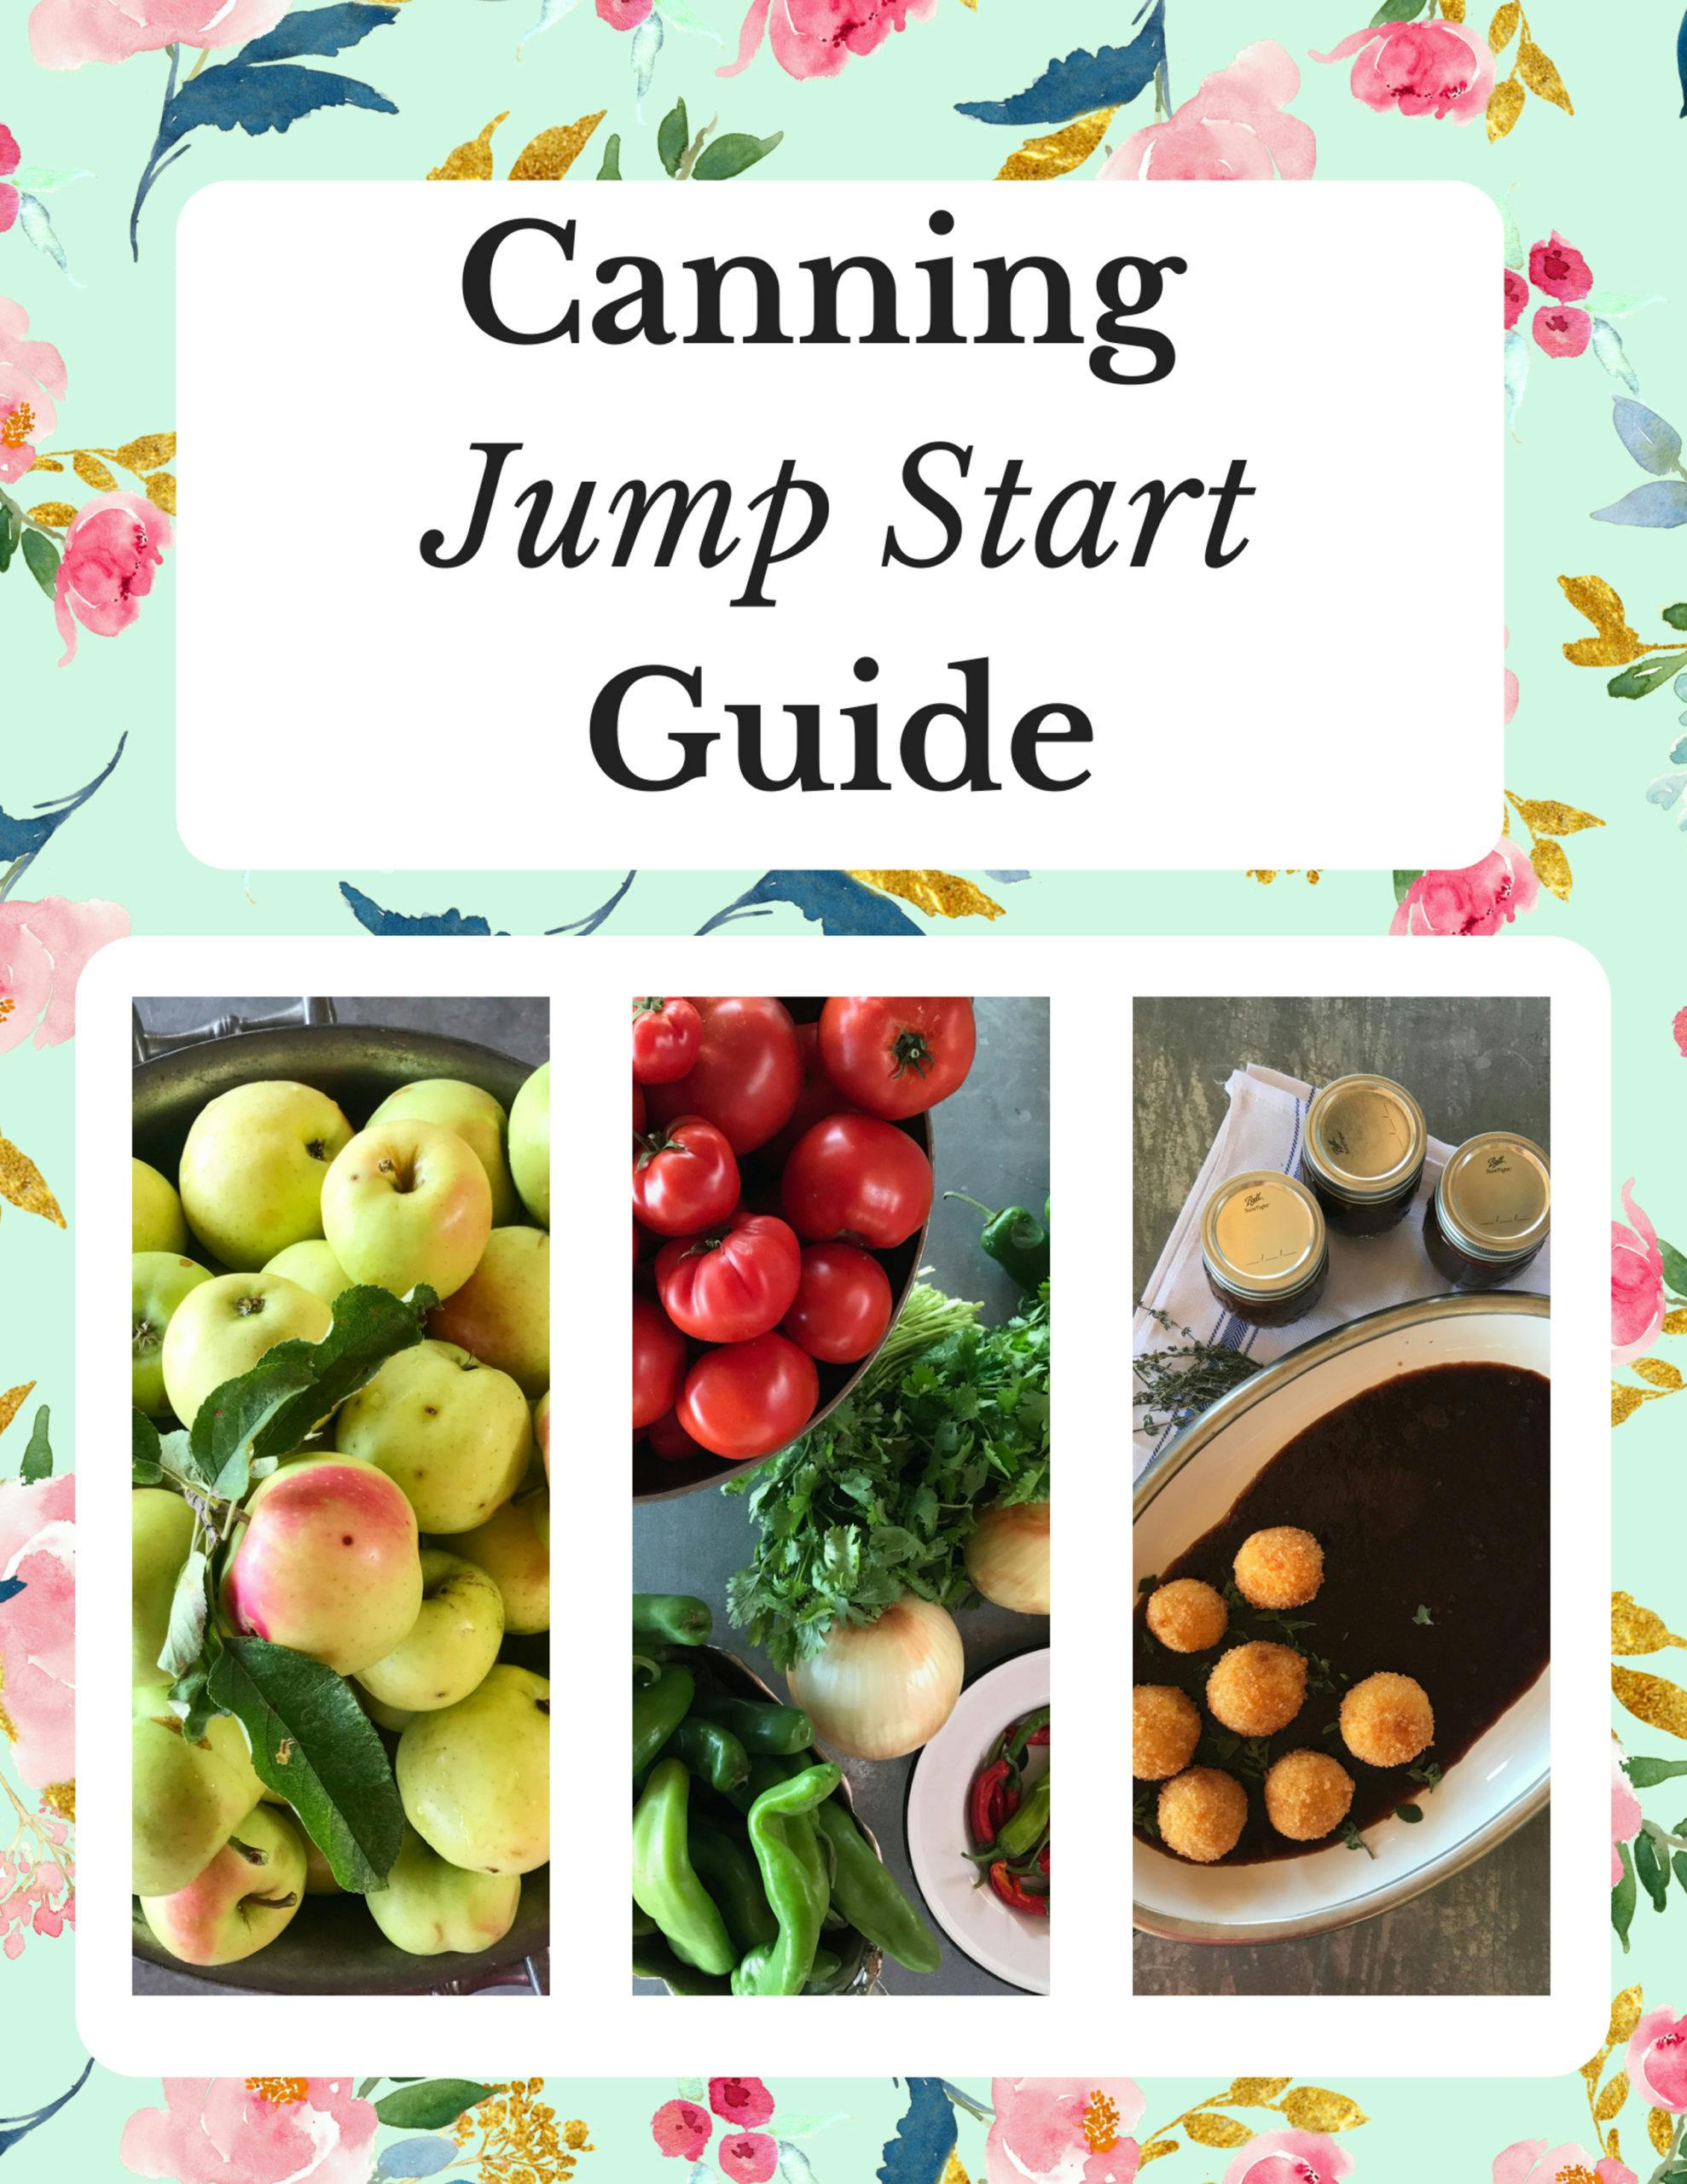 Canning Jump Start Guide